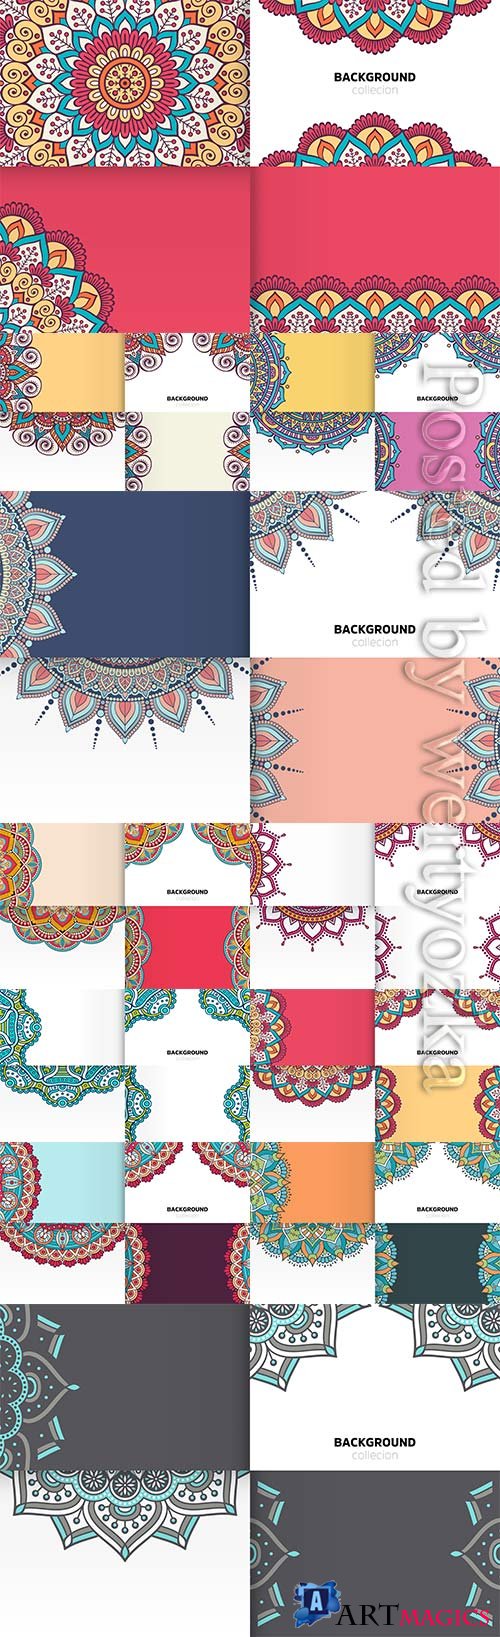 Background vector template in ethnic style